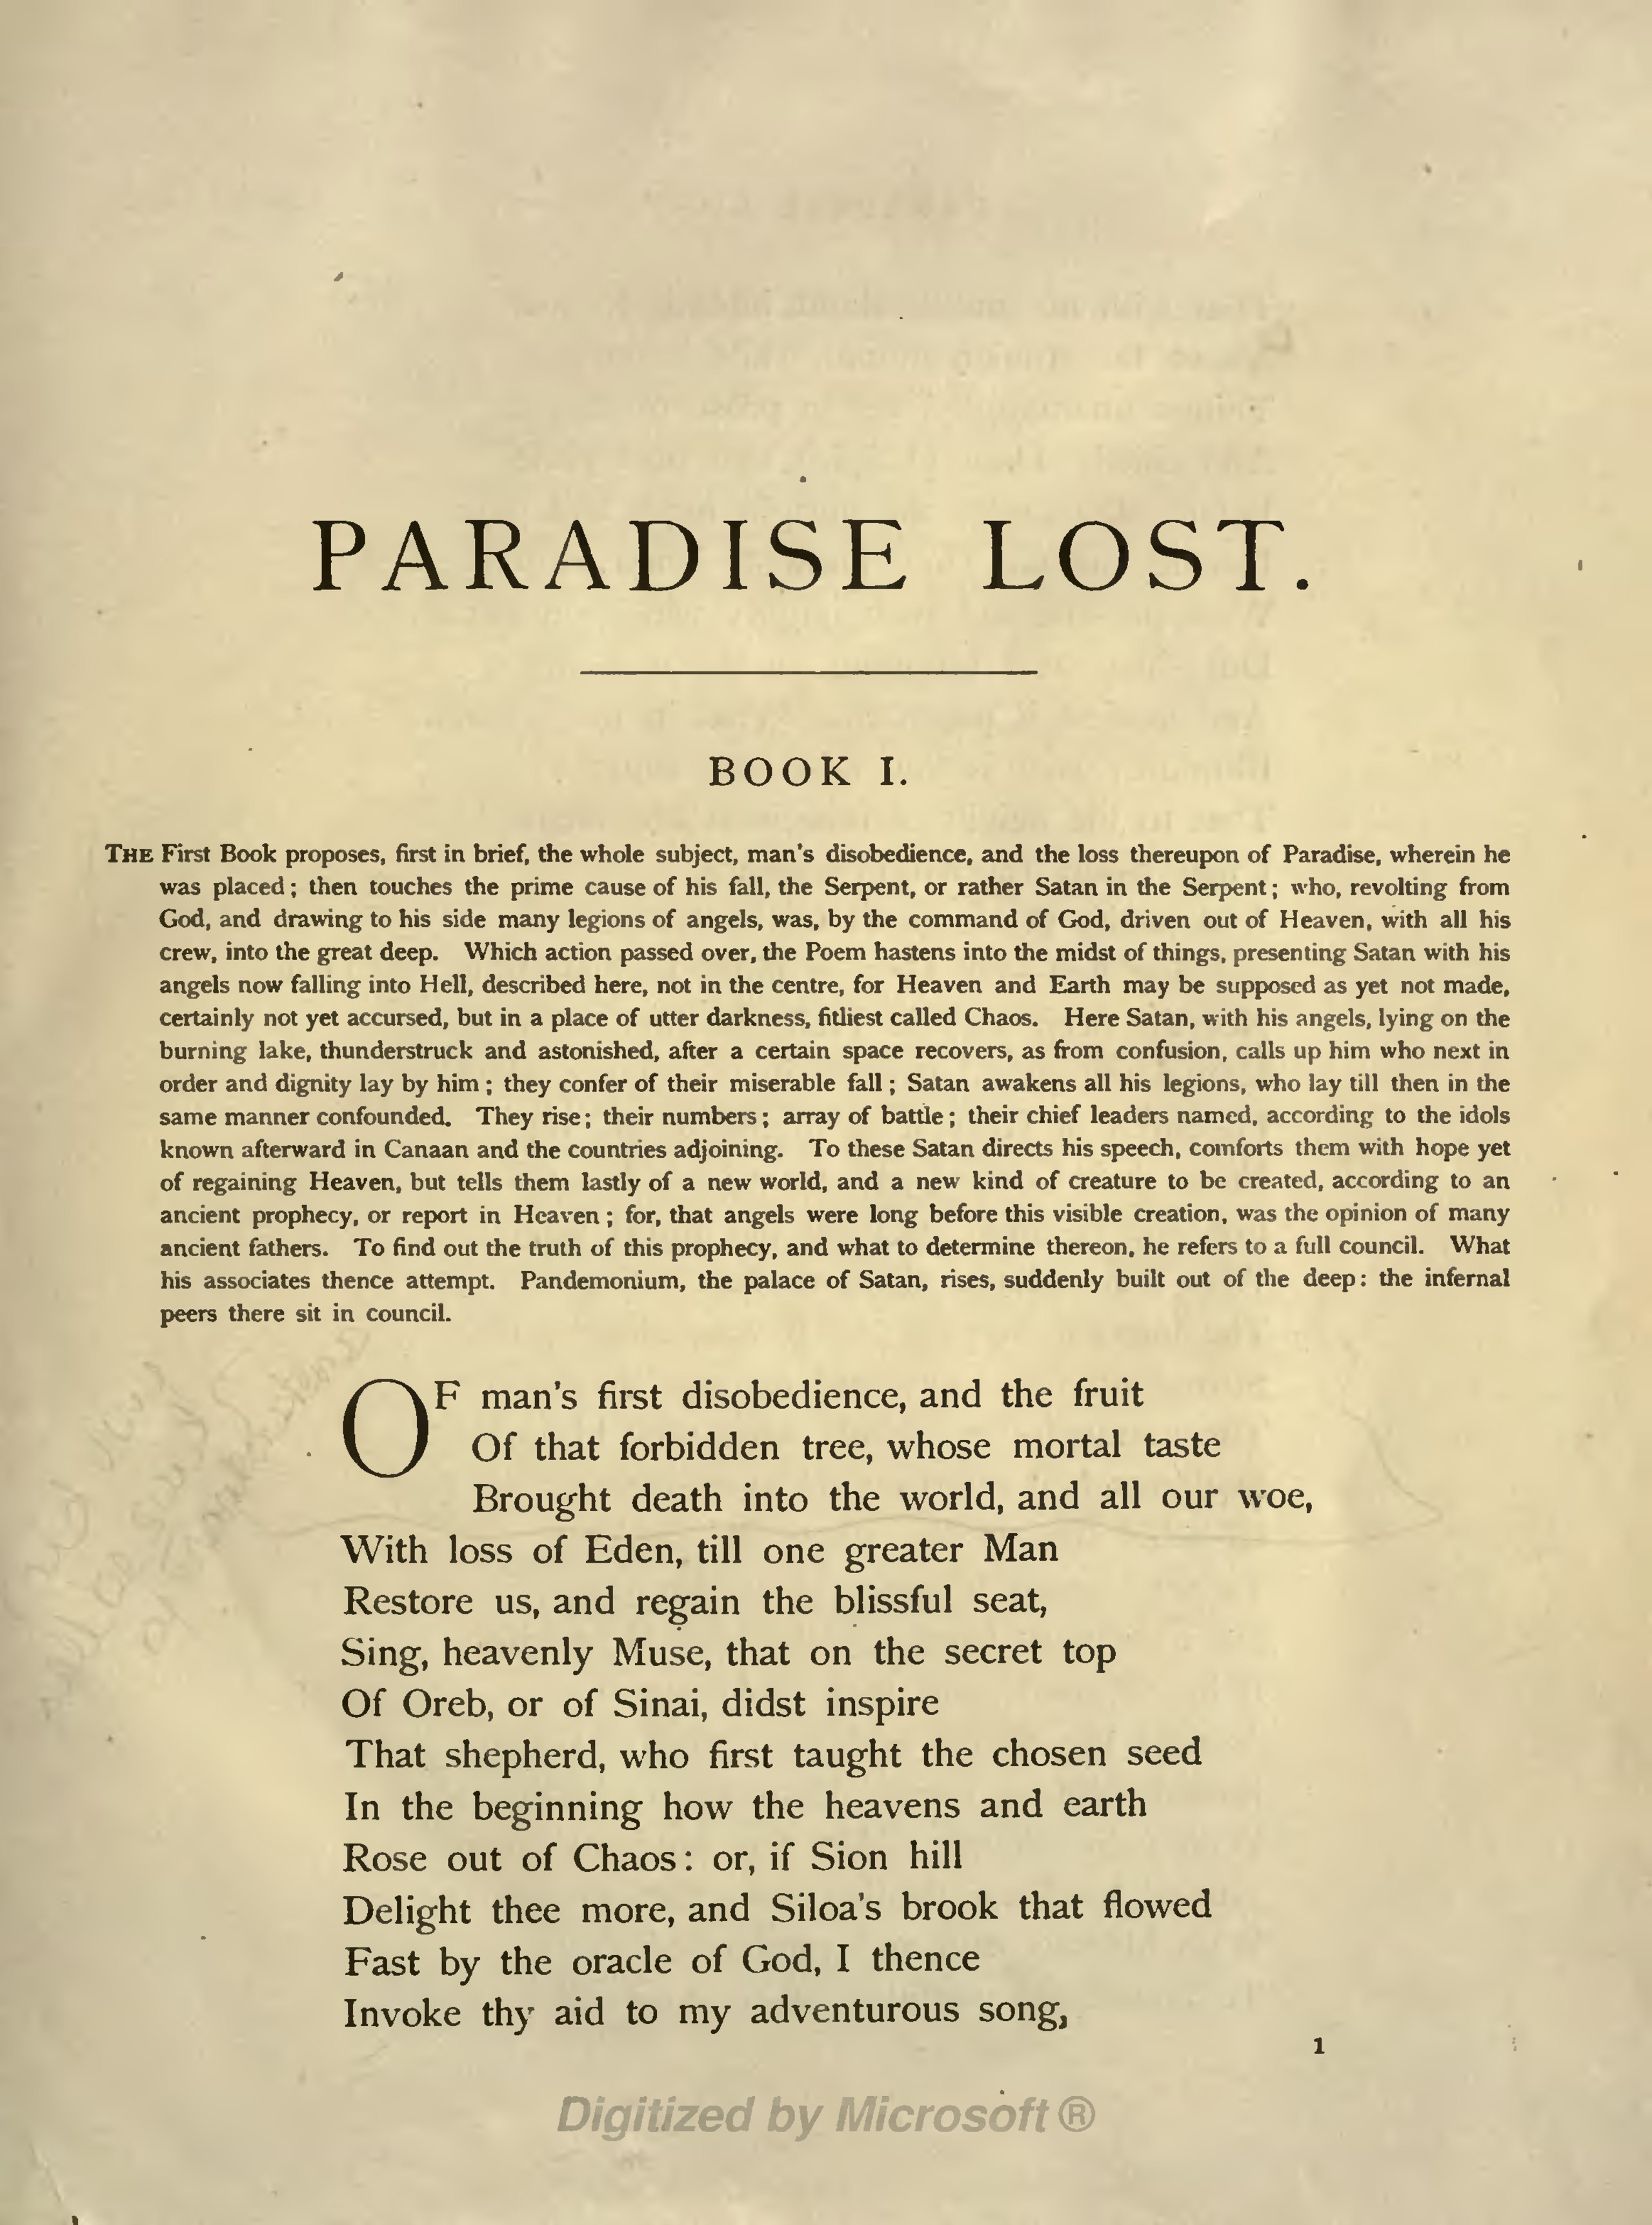 Milton's Paradise Lost: a survival guide for a fractured world